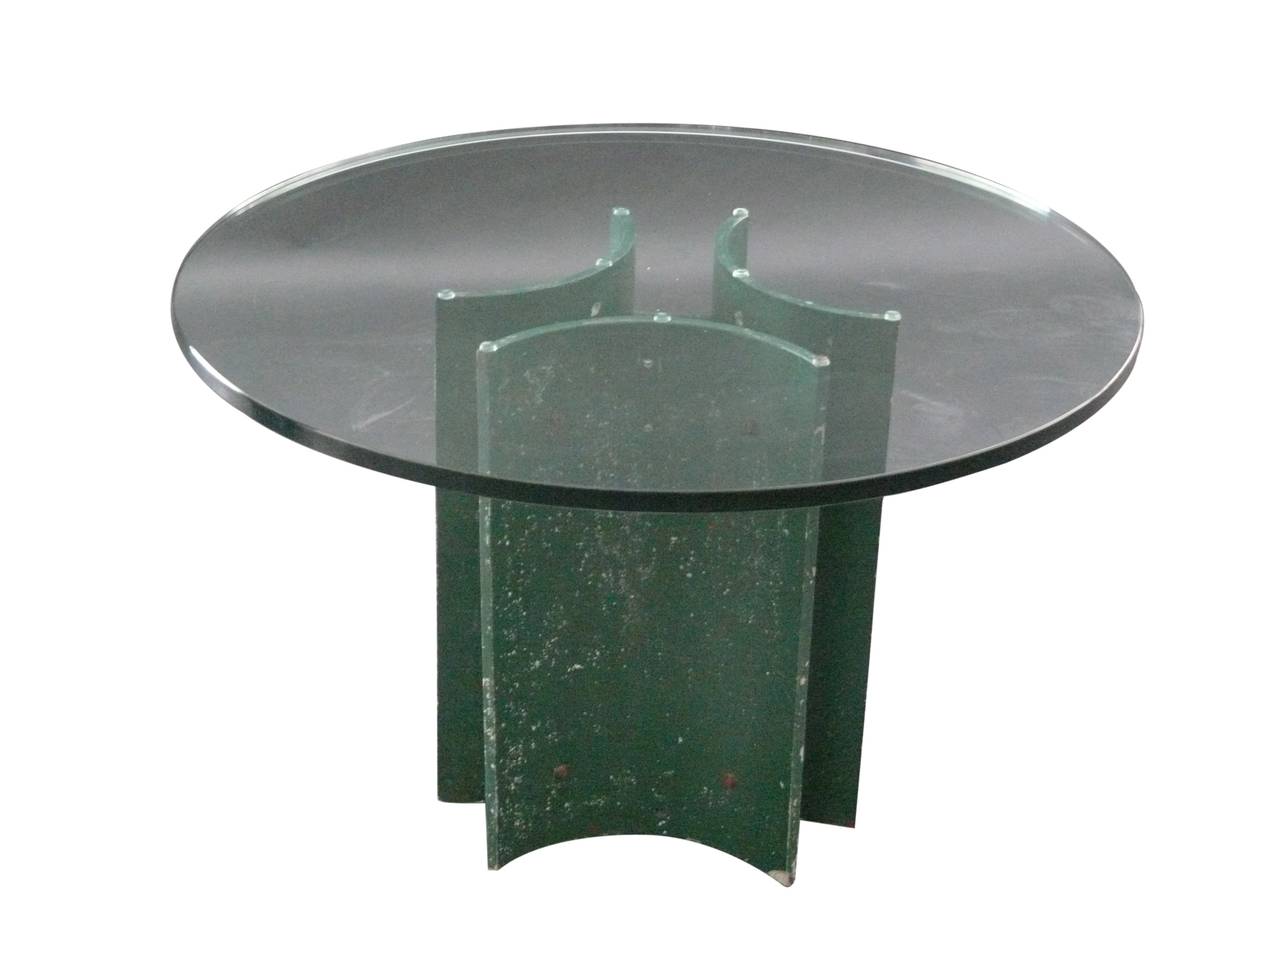 Fantastic architectural table by Willy Guhl. Rounded cement pillars with steel bars. 3/4 inch glass table top is 32